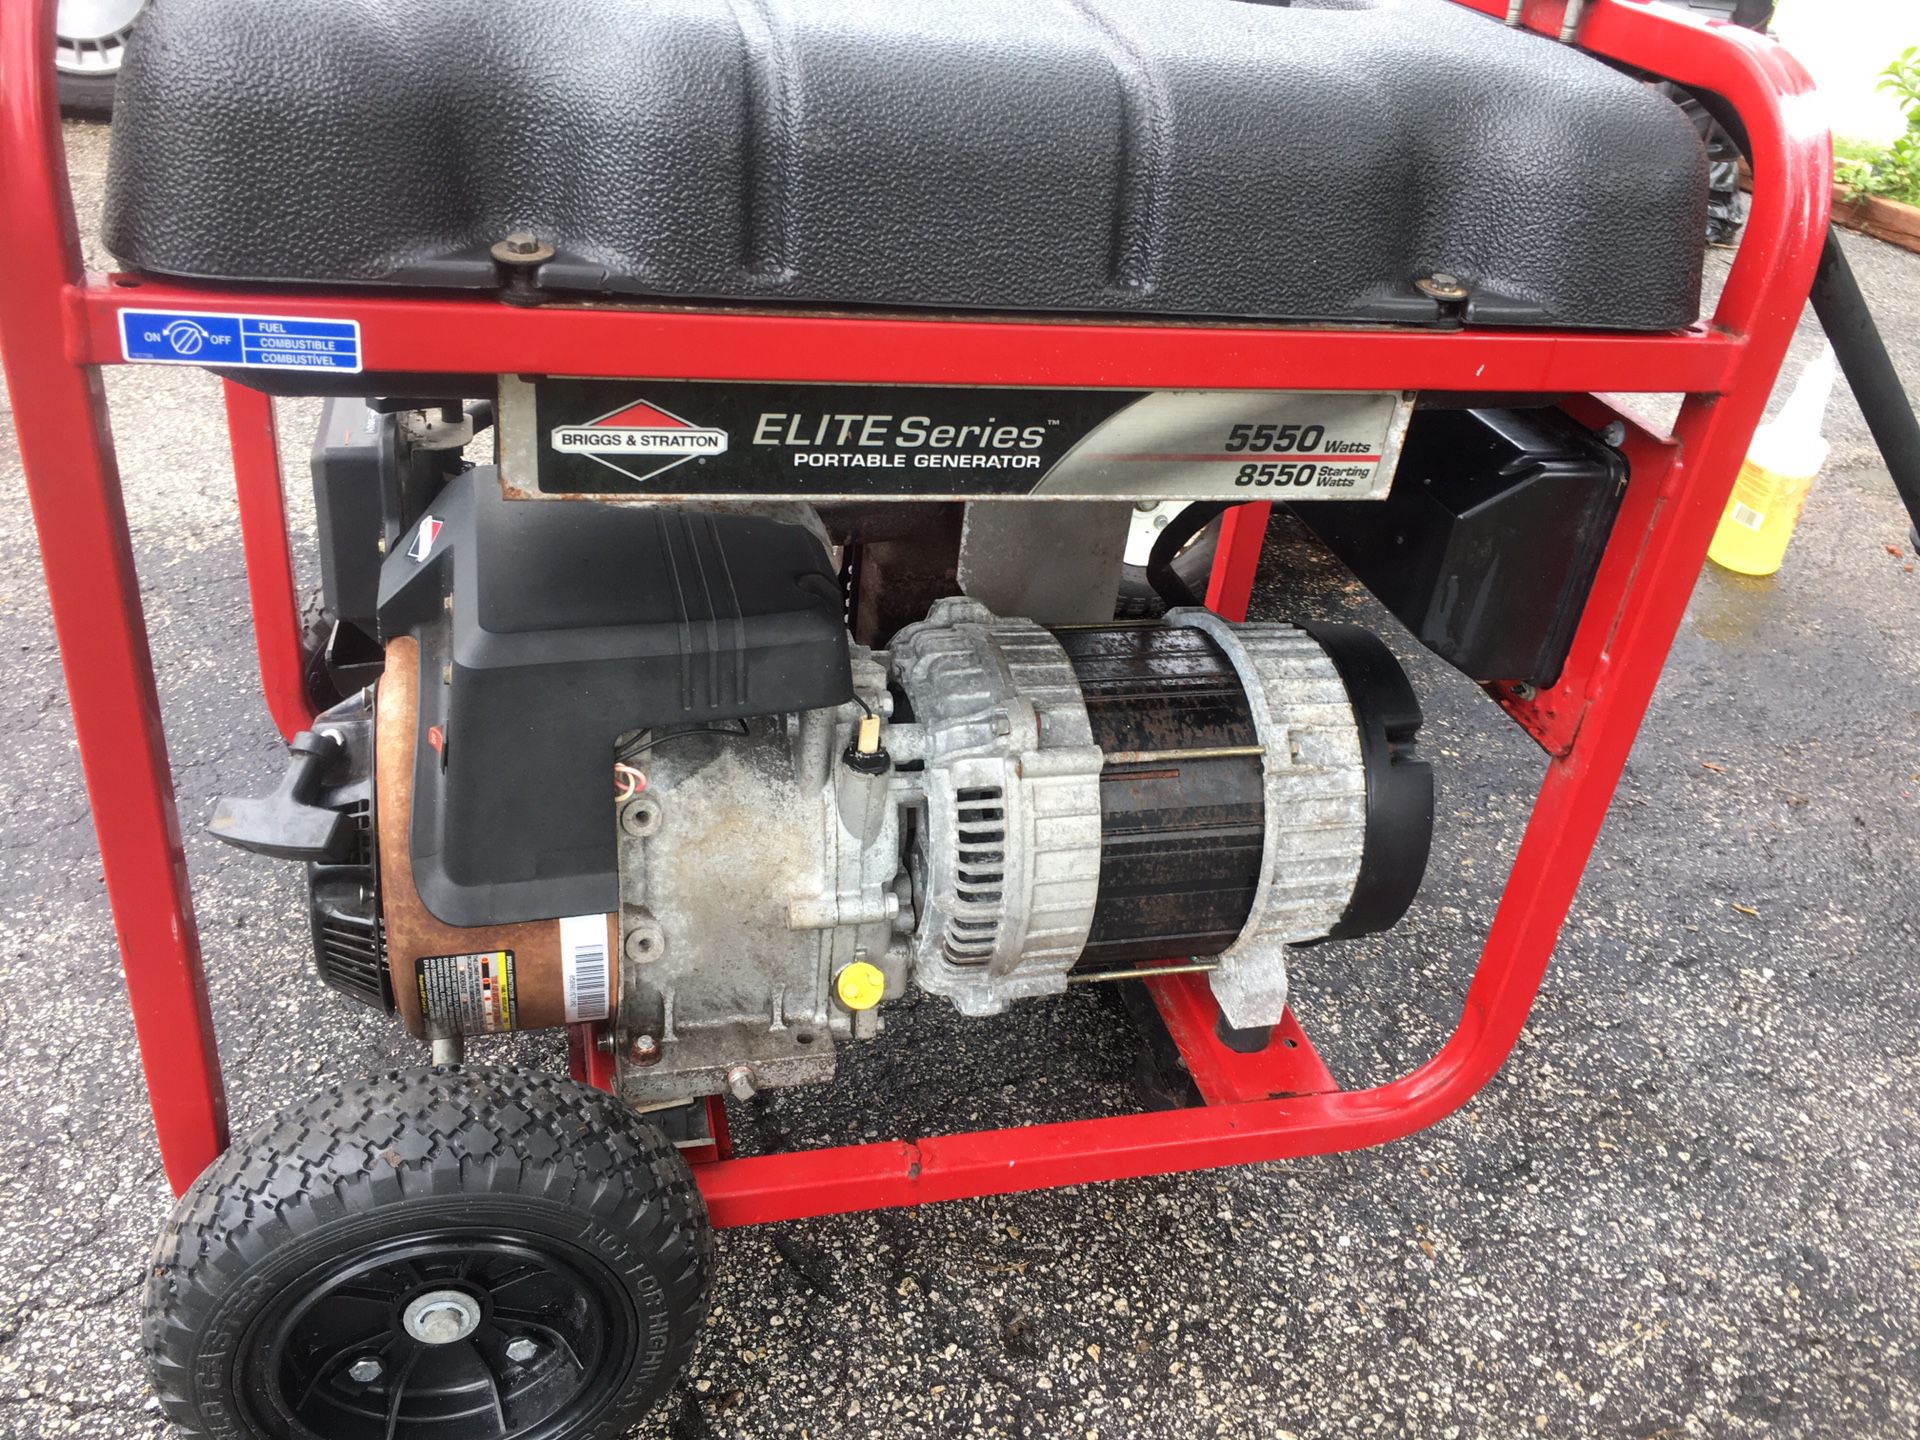 MUST SEE GENERATOR- 8550 Starting Watts [Brand: Briggs & Stratton] WORKS GOOD/ 475 OR BEST OFFER (NO LOWBALL OFFERS)